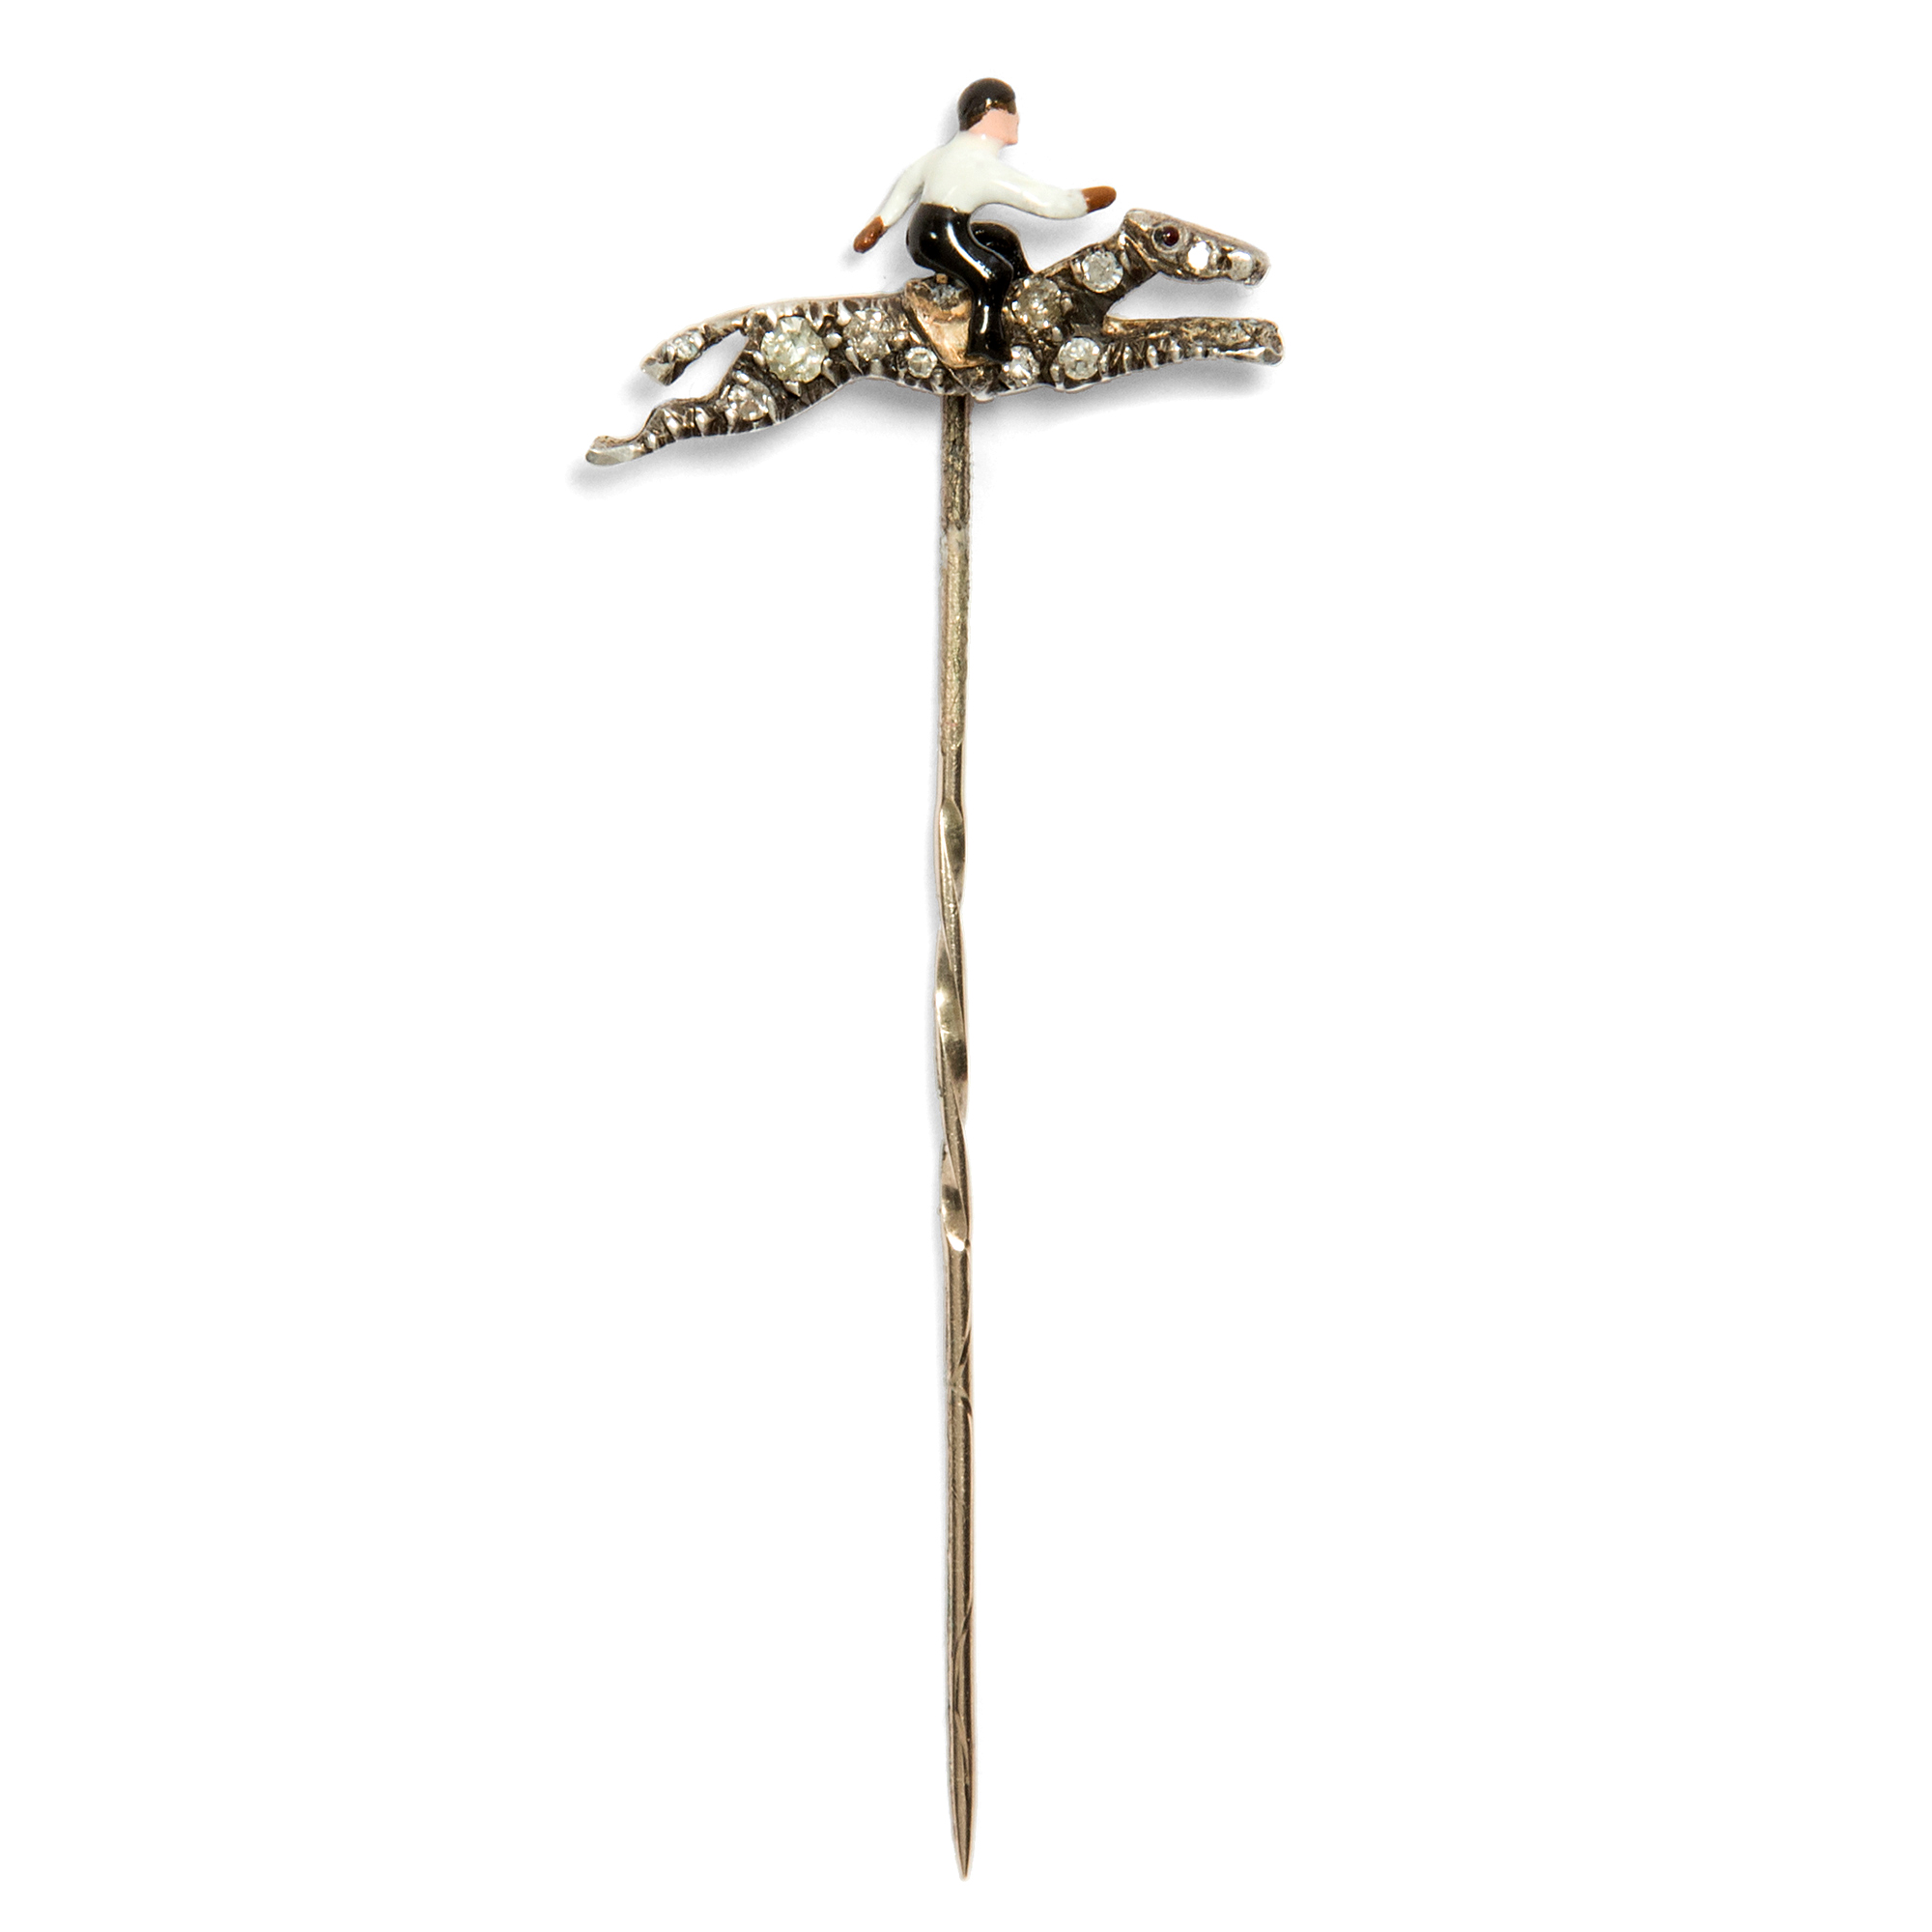 Antique horse jumping lapel pin with enamel & diamonds, England ca. 1895